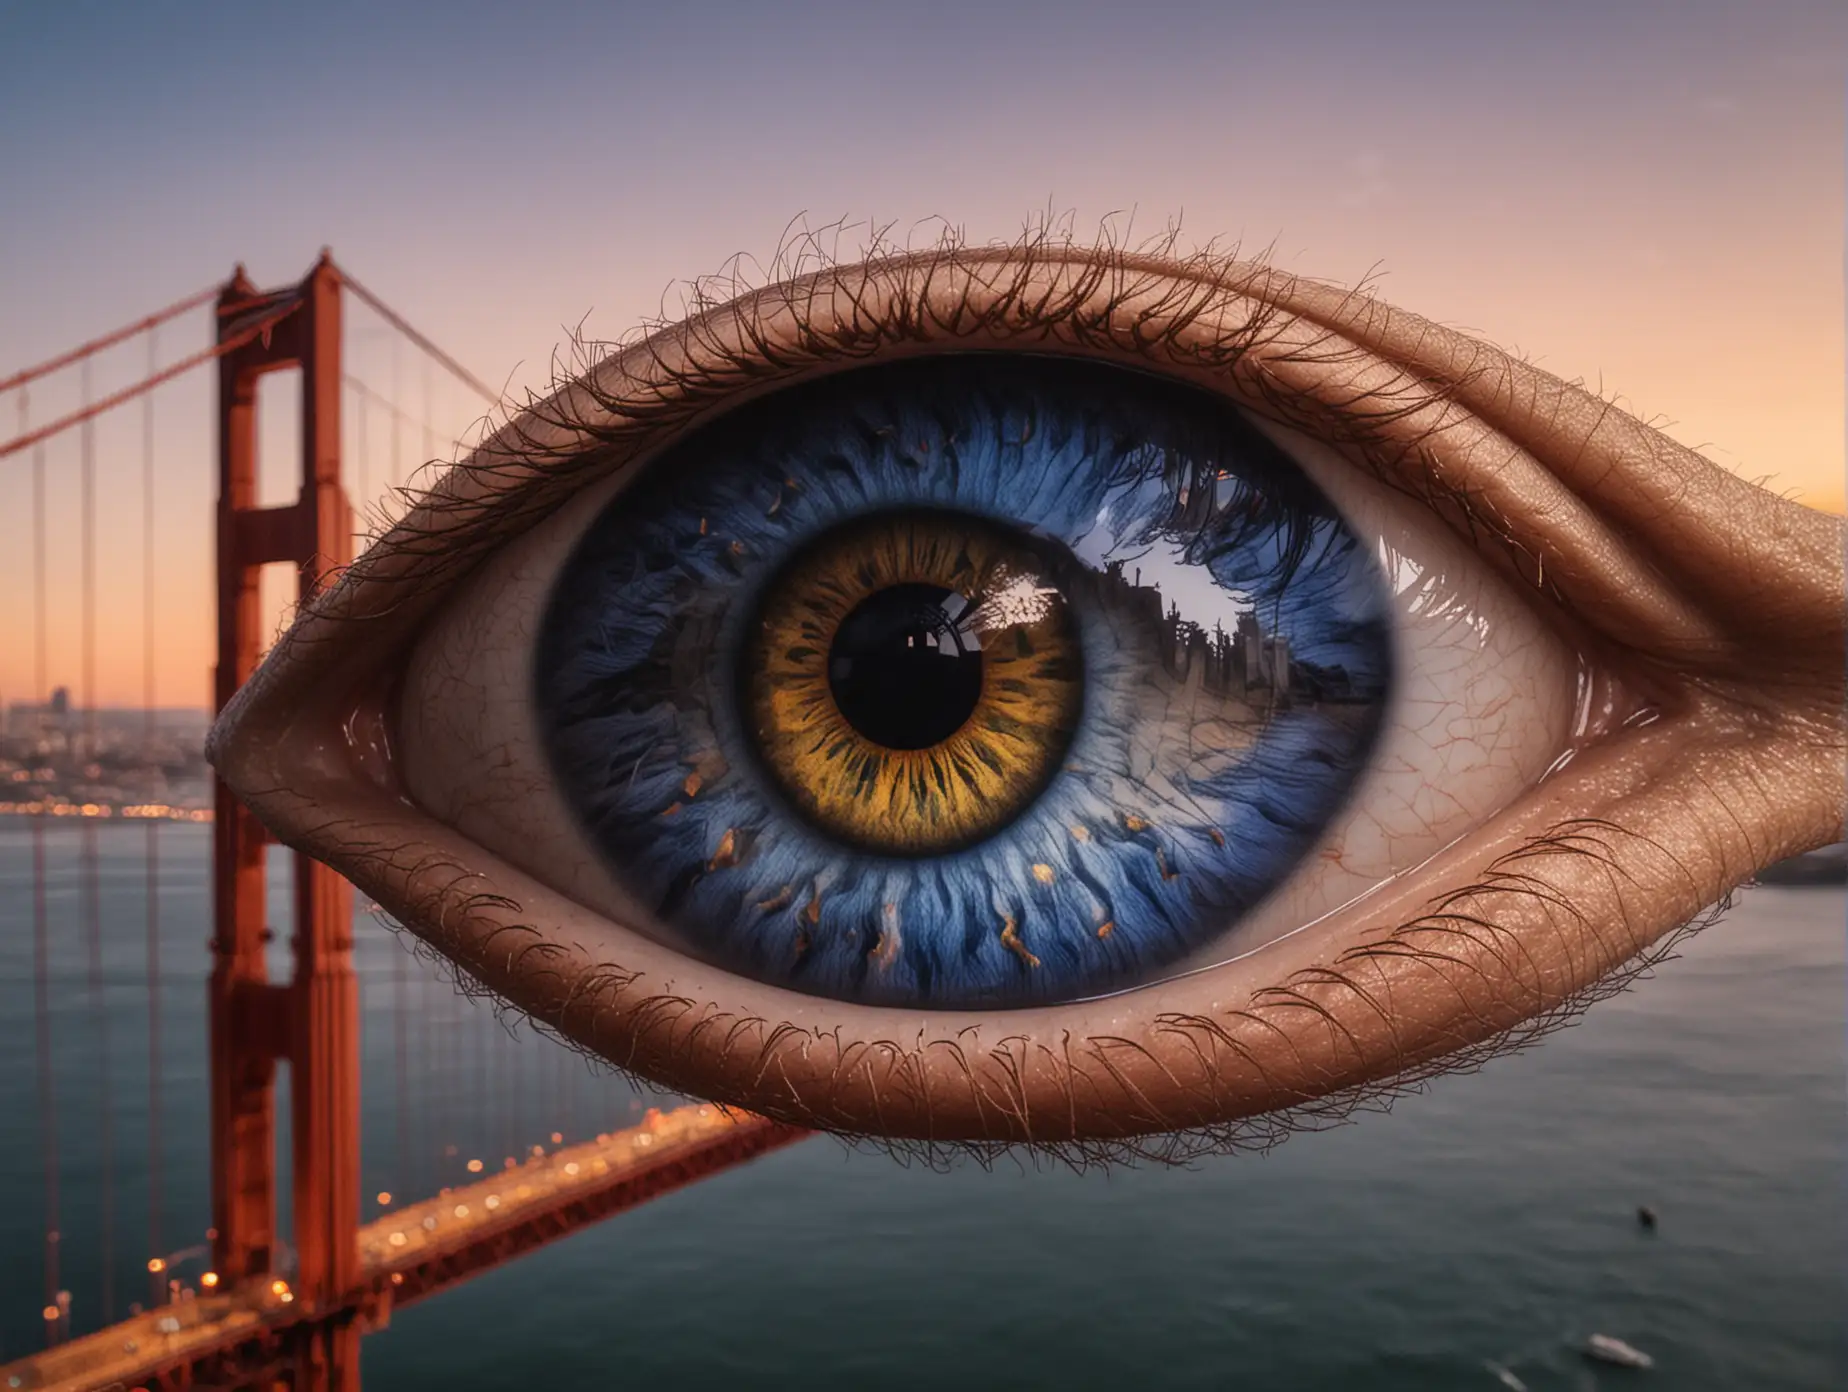 giant eye with a blue iris floating over the Golden Gate Bridge at sunset